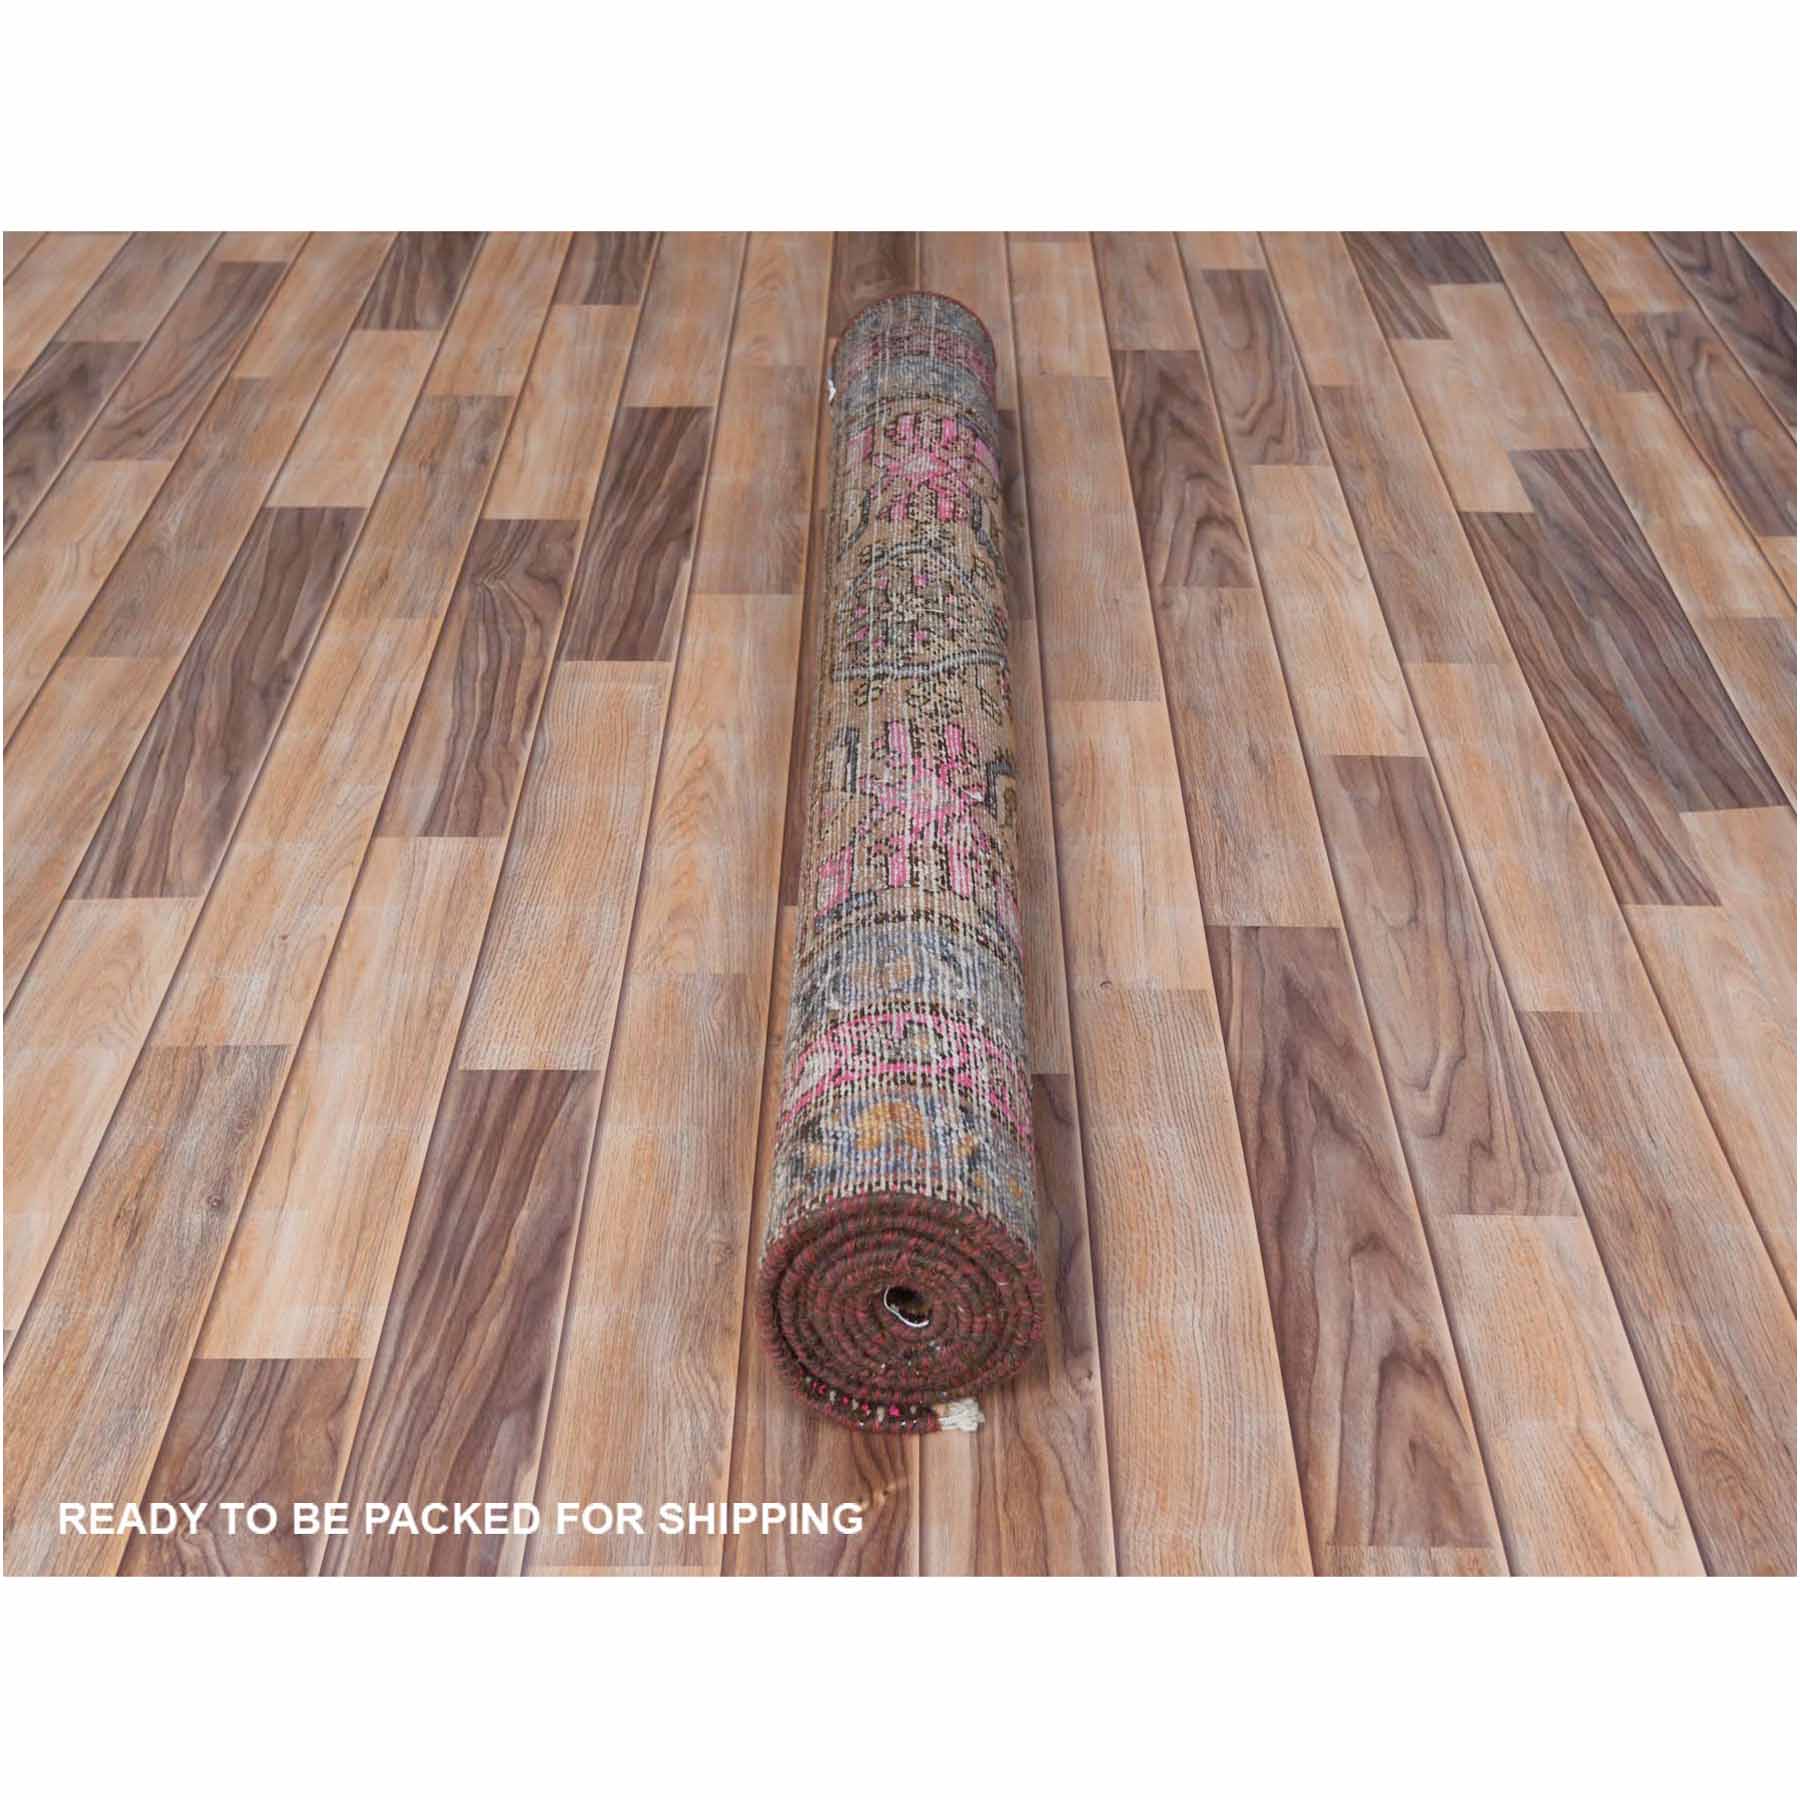 Overdyed-Vintage-Hand-Knotted-Rug-309345